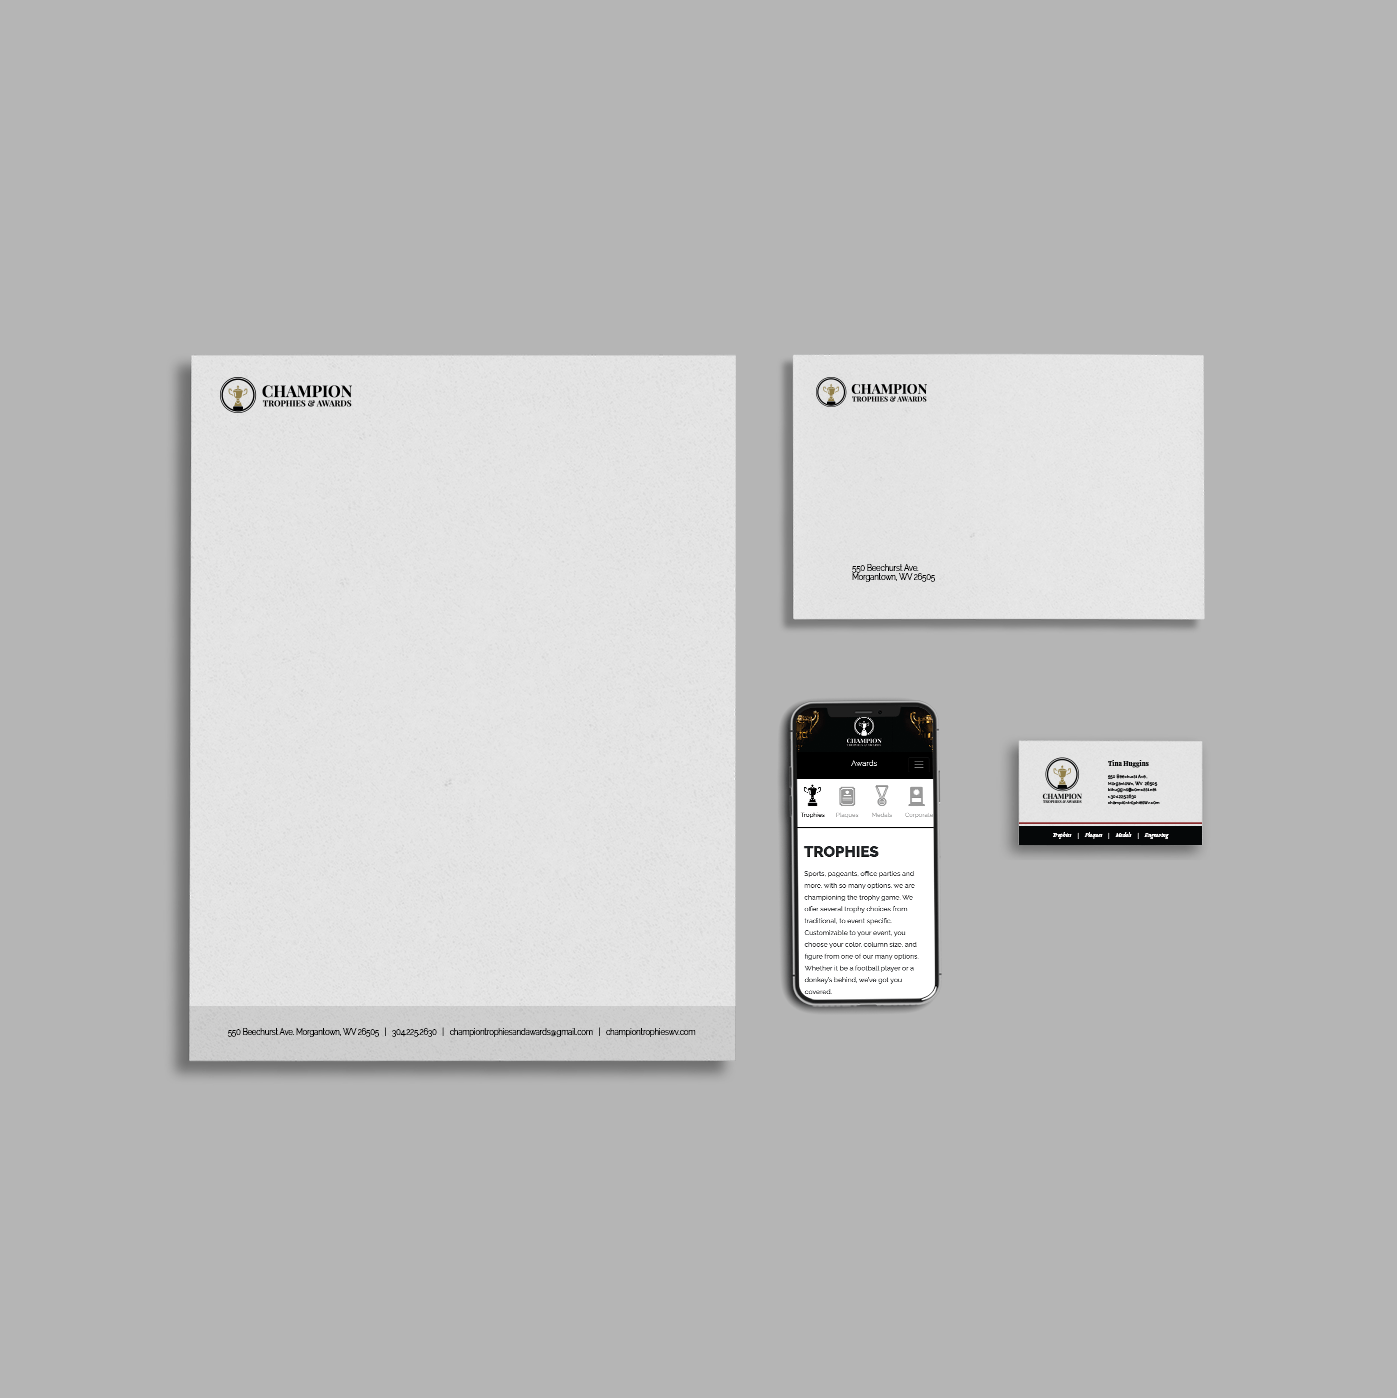 Stationary set consisting of a letterhead, envelope, mobile website, and business card